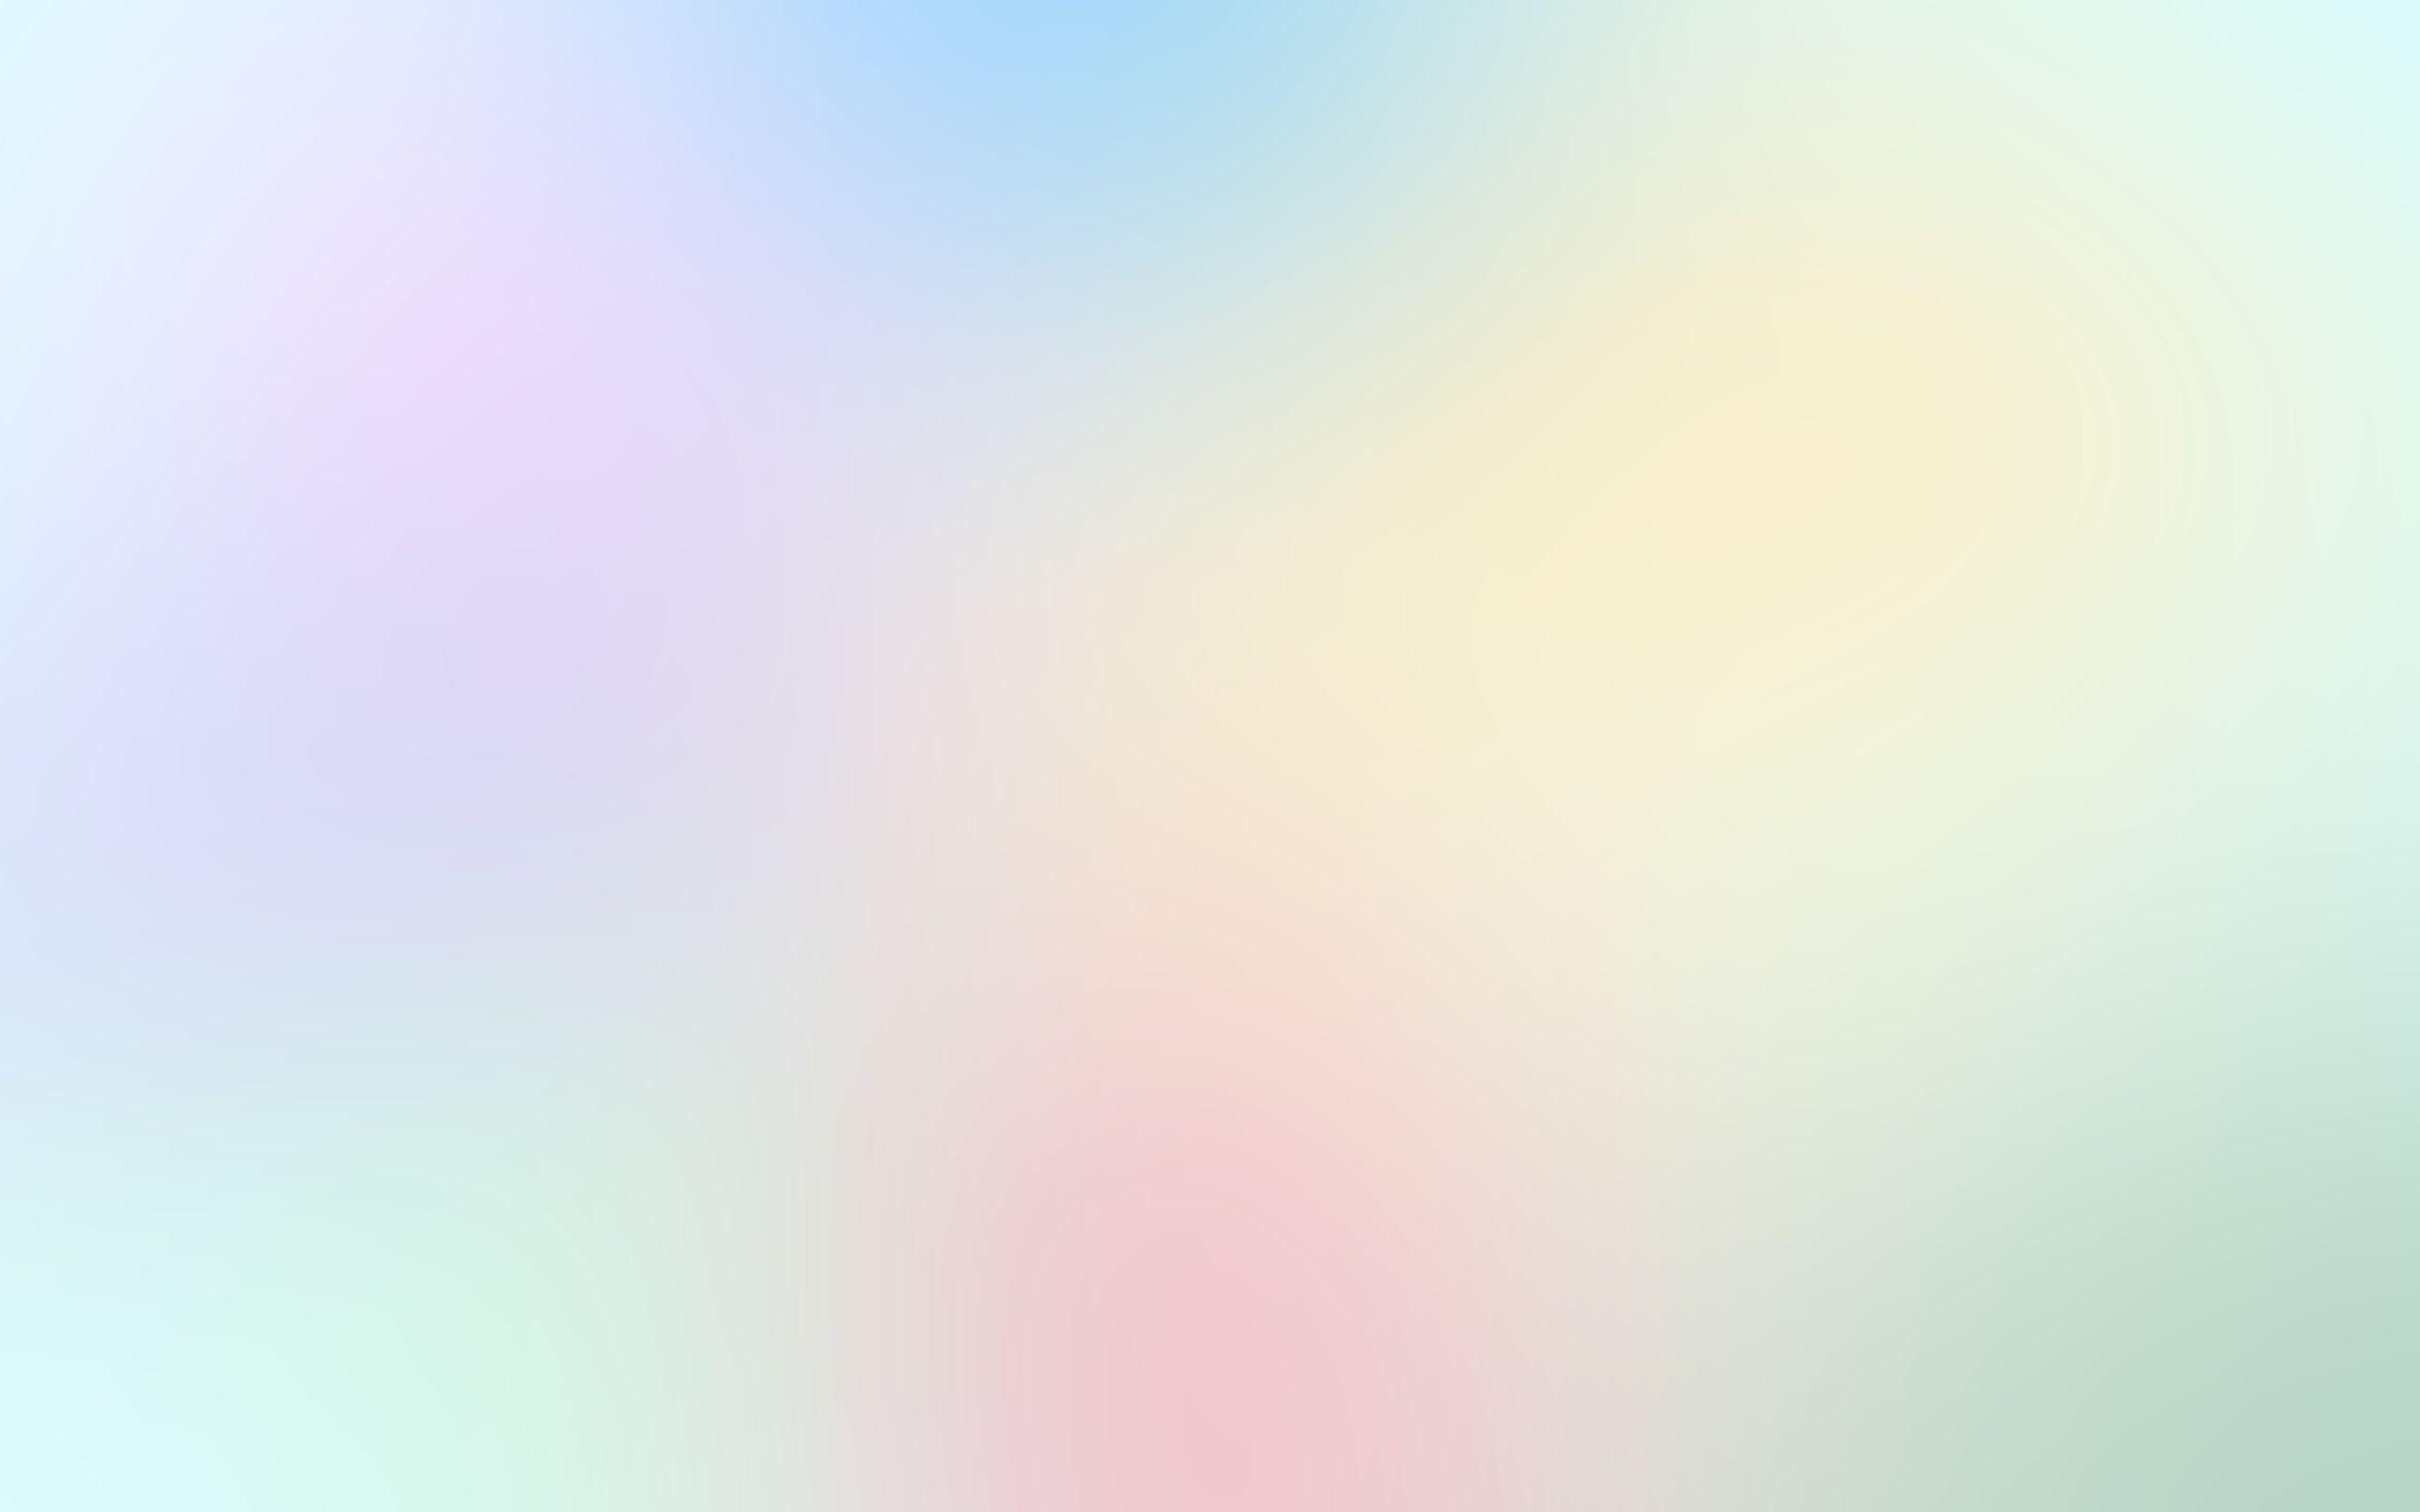 Pastel Rainbow Tumblr Wallpaper Backgrounds » Extra Wallpapers 1080p